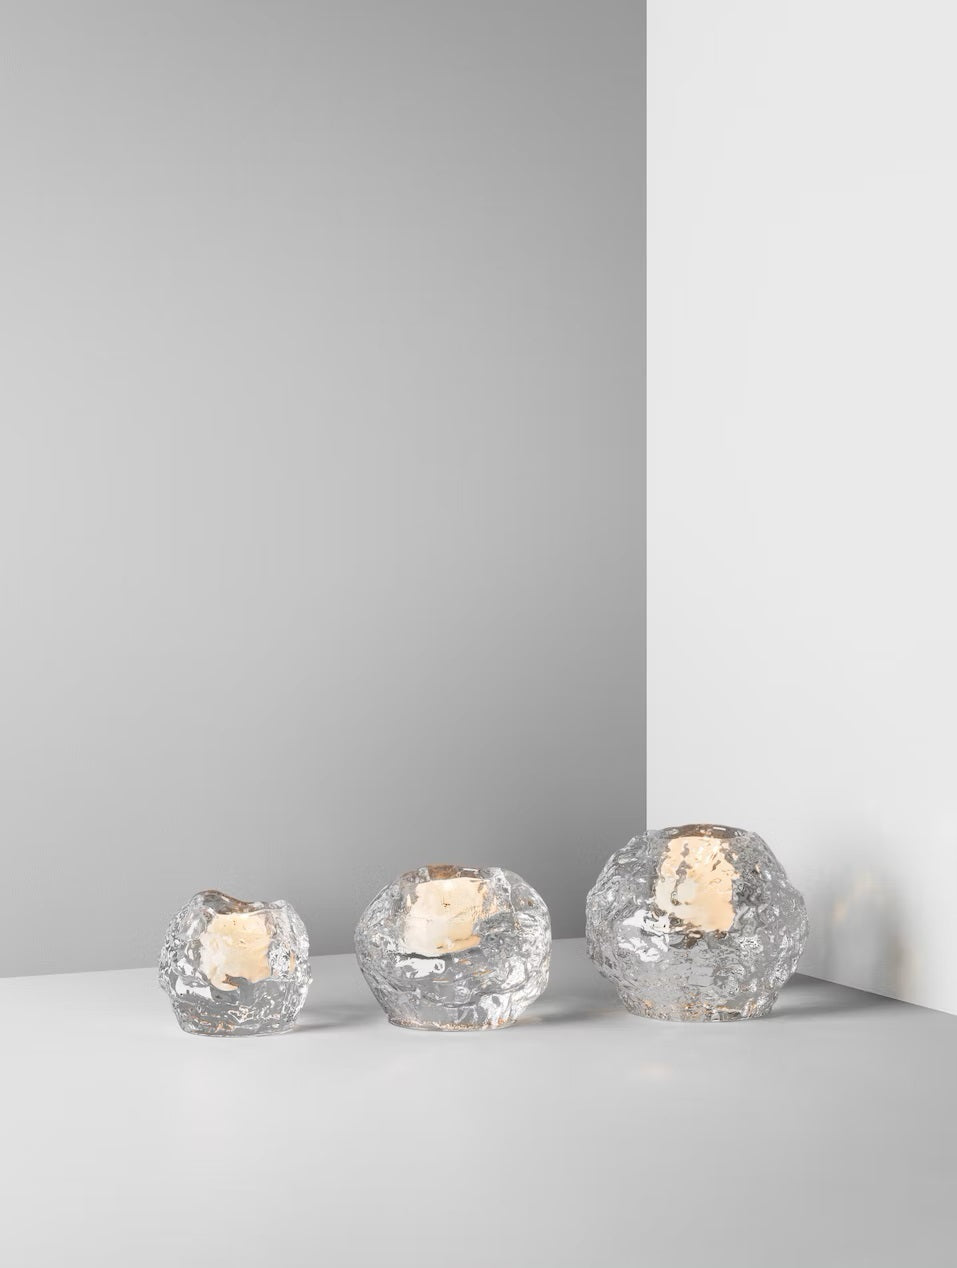 Three textured, clear glass sphere tea light candle holders sat in a line from smallest on the left and largest on the right against a white background.